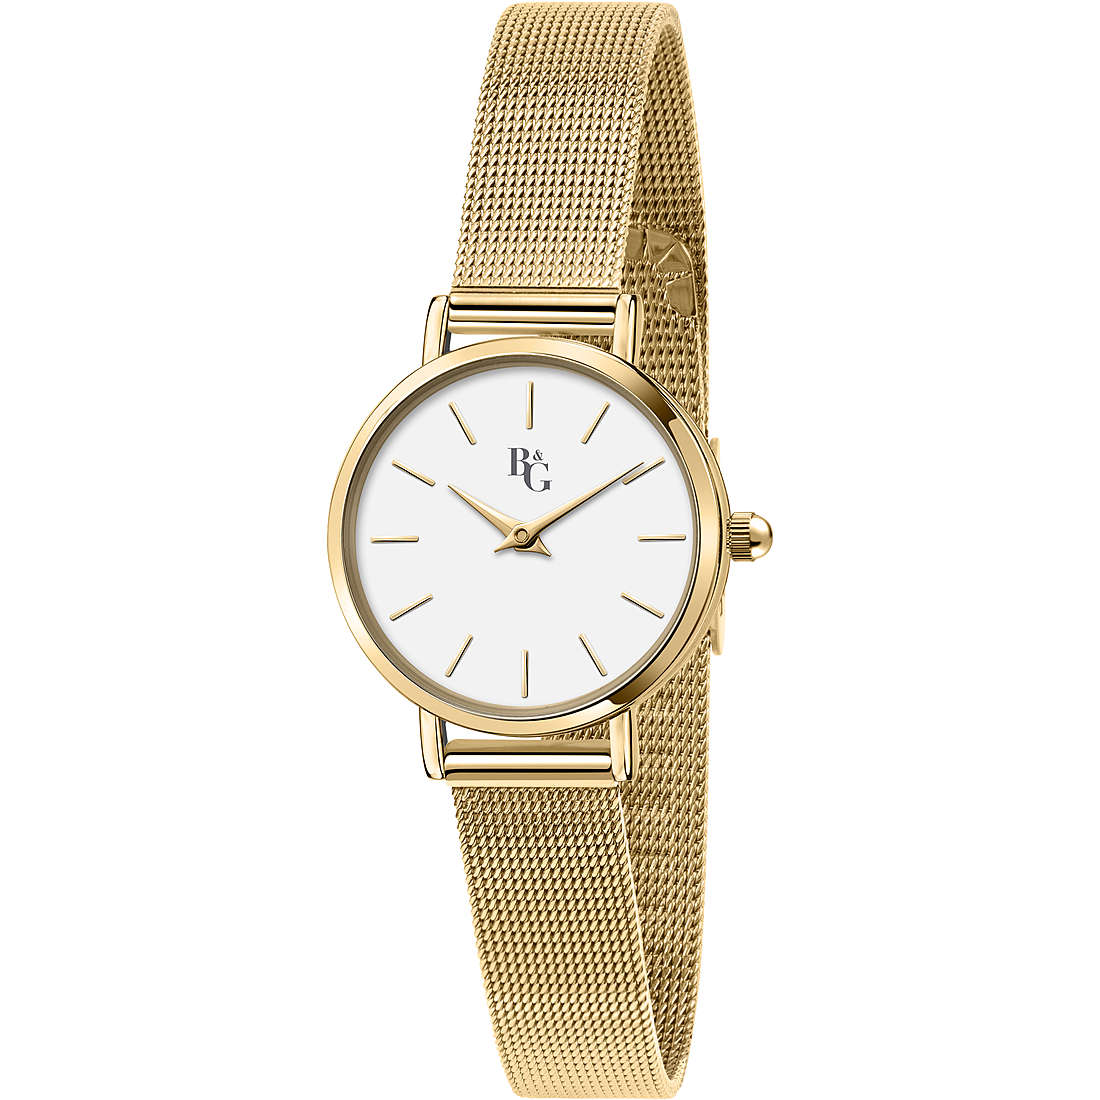 only time watch Metal White dial woman Preppy R3853252549